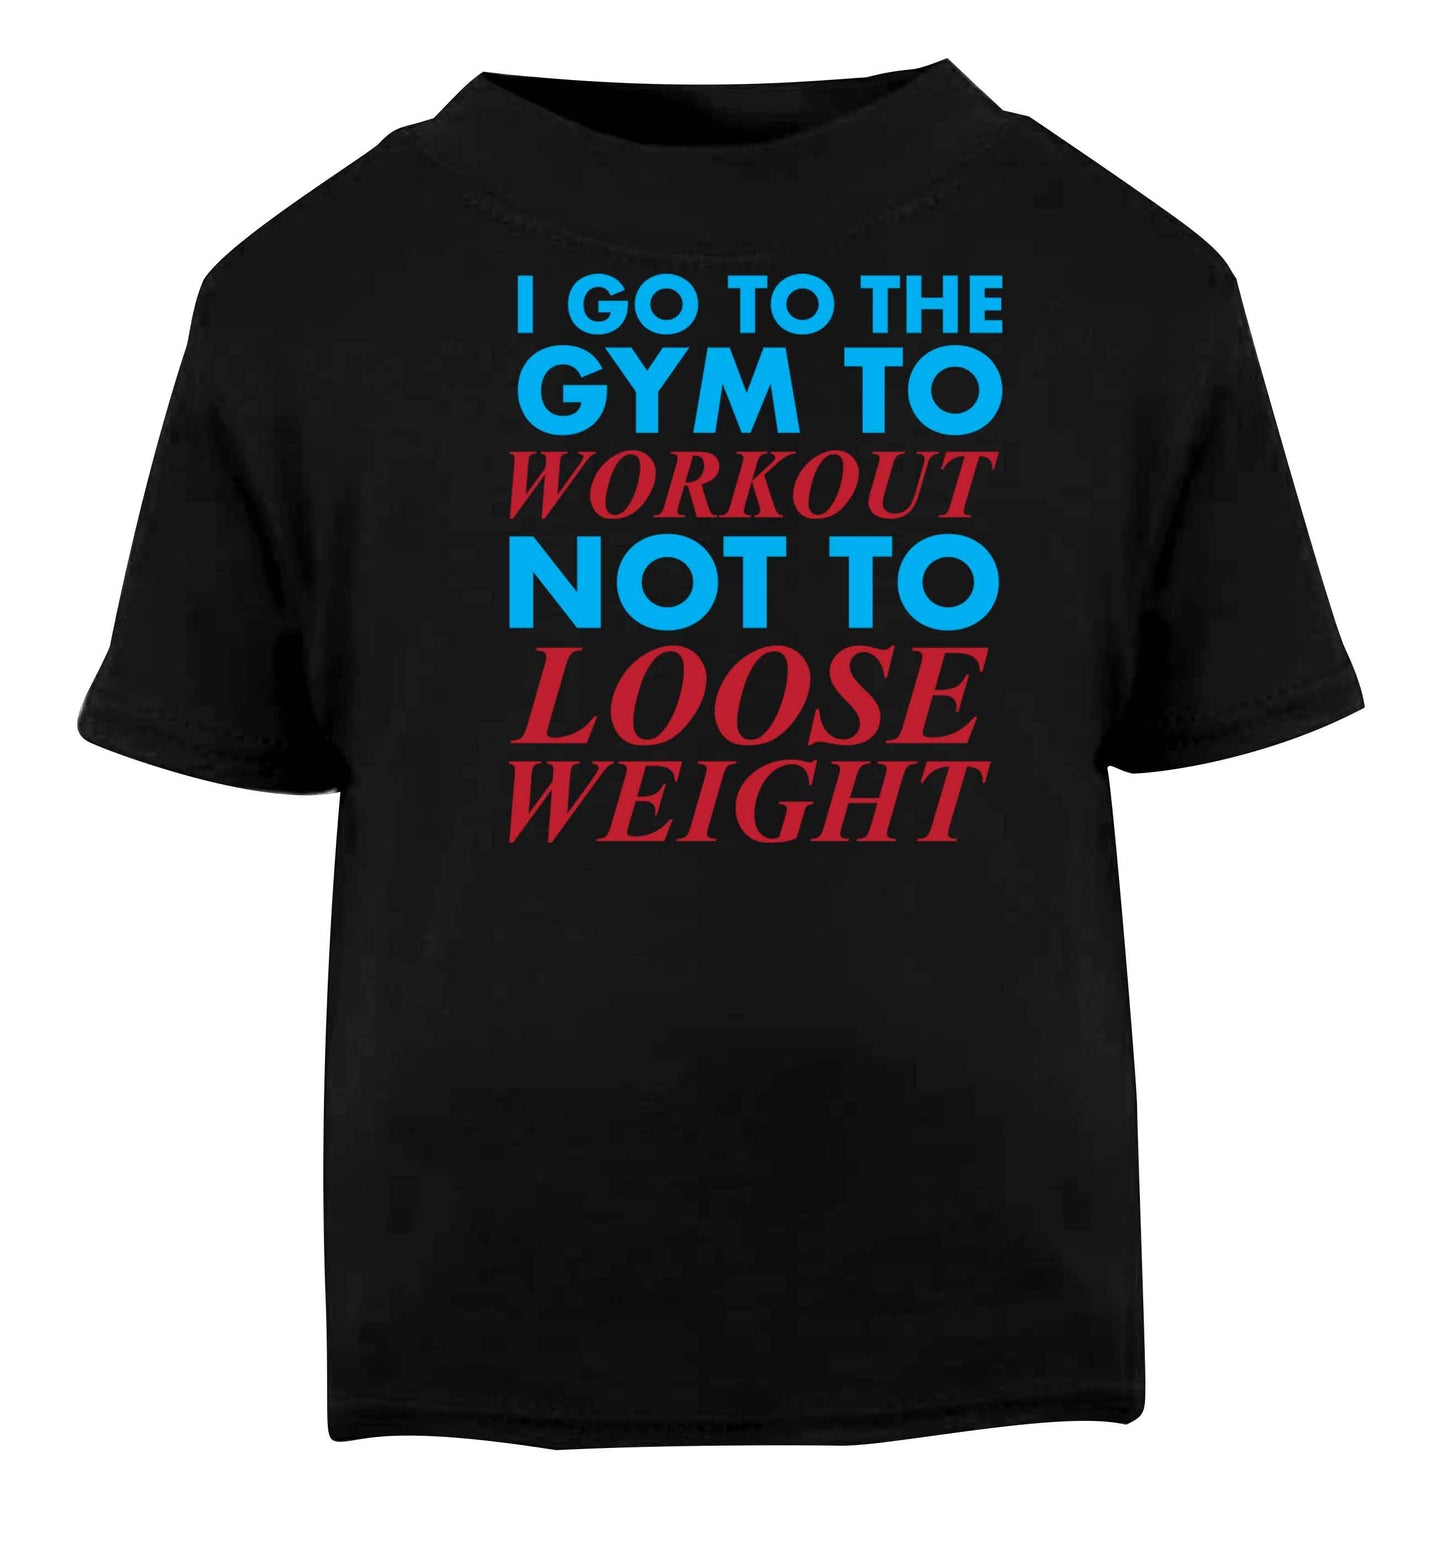 I go to the gym to workout not to loose weight Black baby toddler Tshirt 2 years